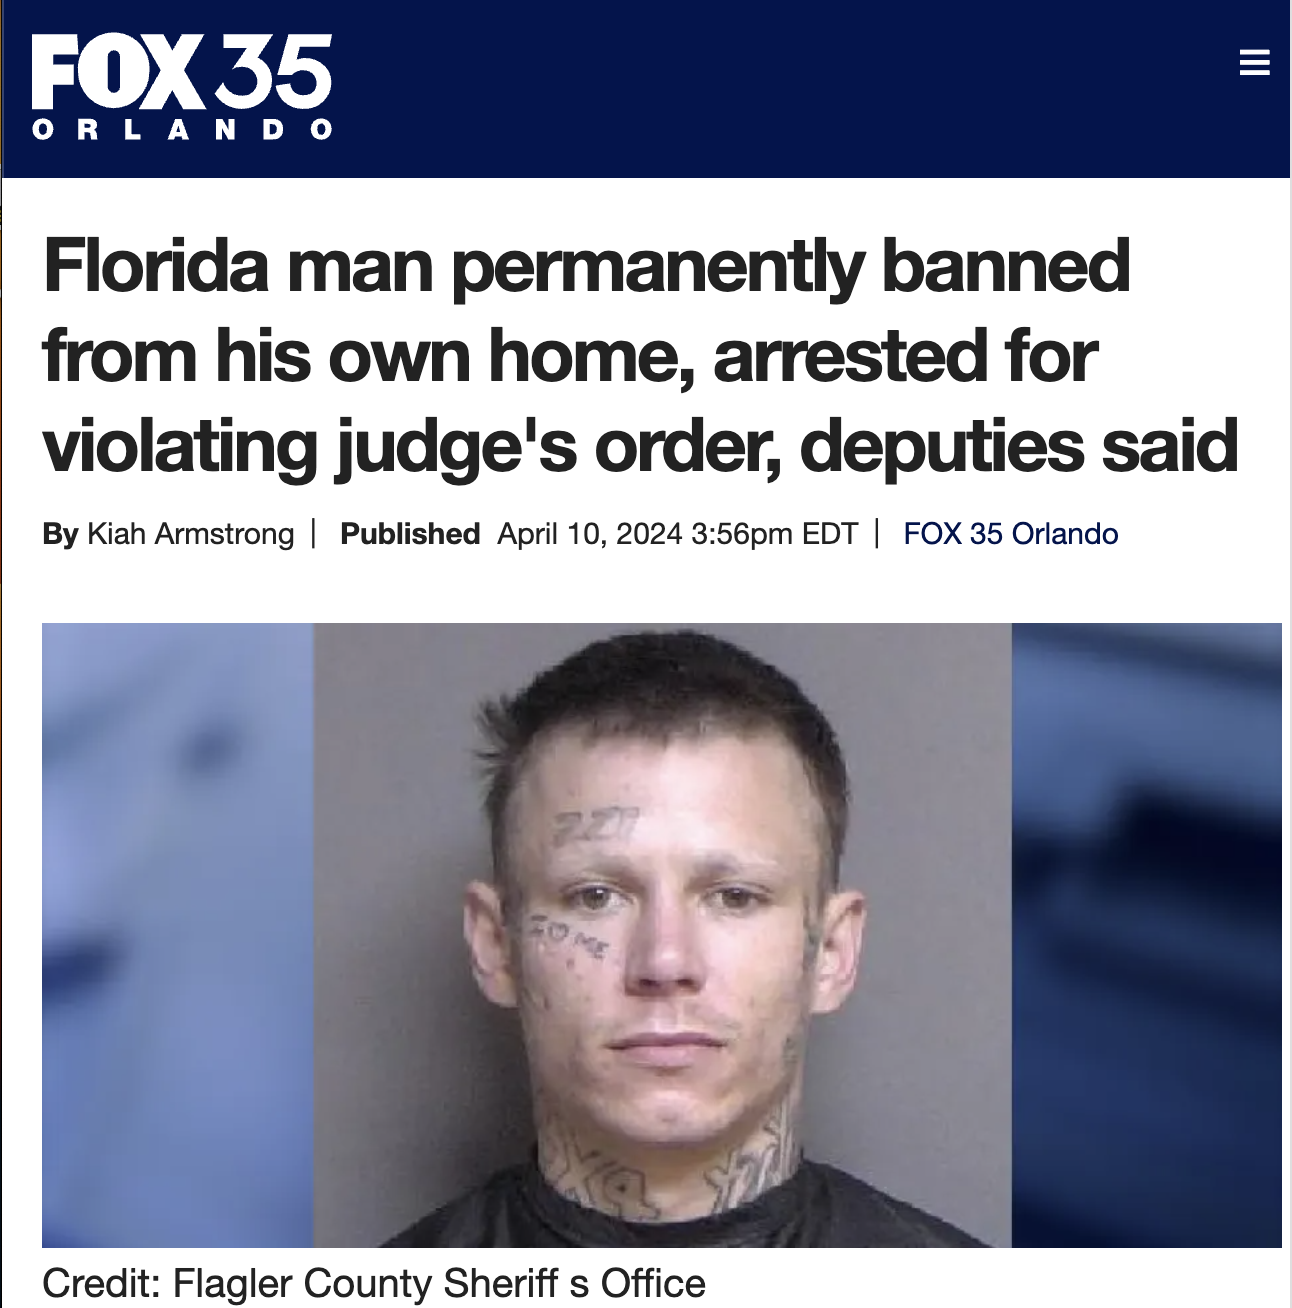 photo caption - Fox 35 Orlando Florida man permanently banned from his own home, arrested for violating judge's order, deputies said By Kiah Armstrong | Published pm Edt | Fox 35 Orlando Credit Flagler County Sheriff s Office Iii